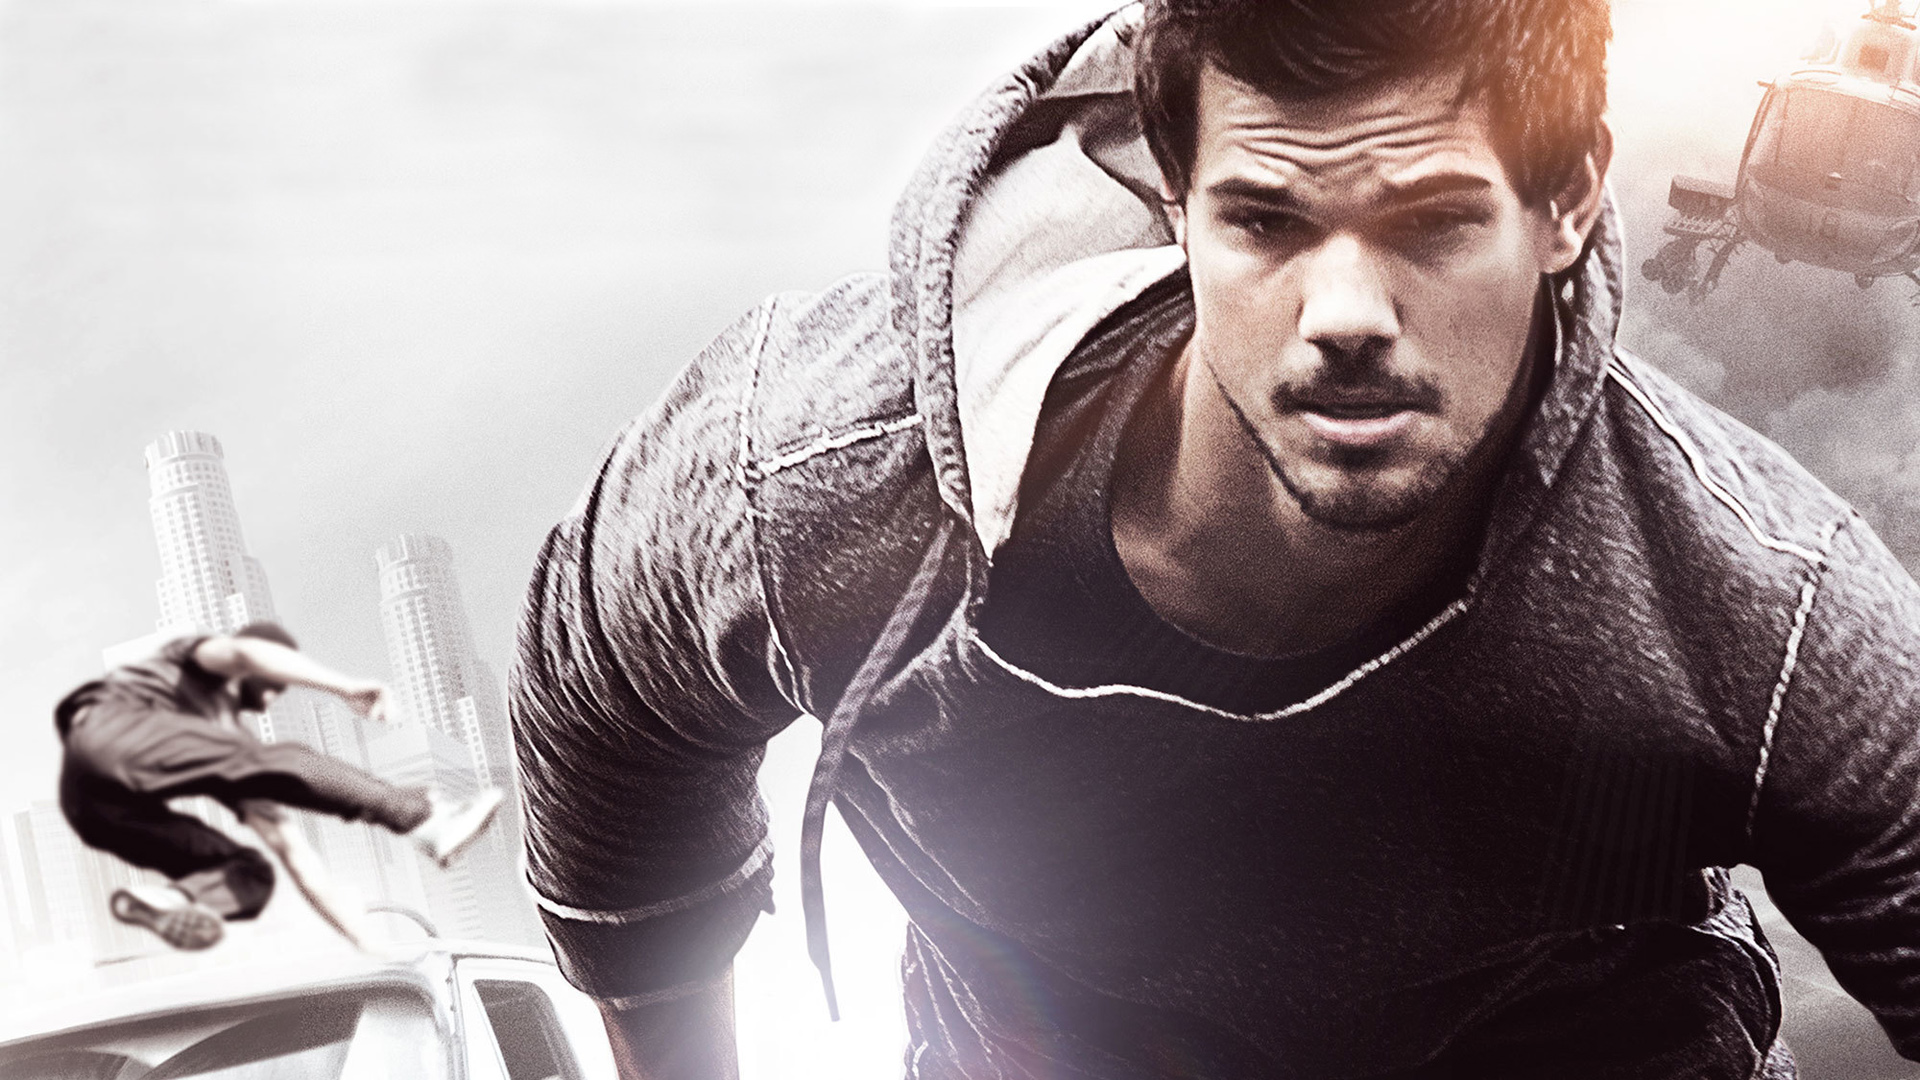 Nice Images Collection: Tracers Desktop Wallpapers